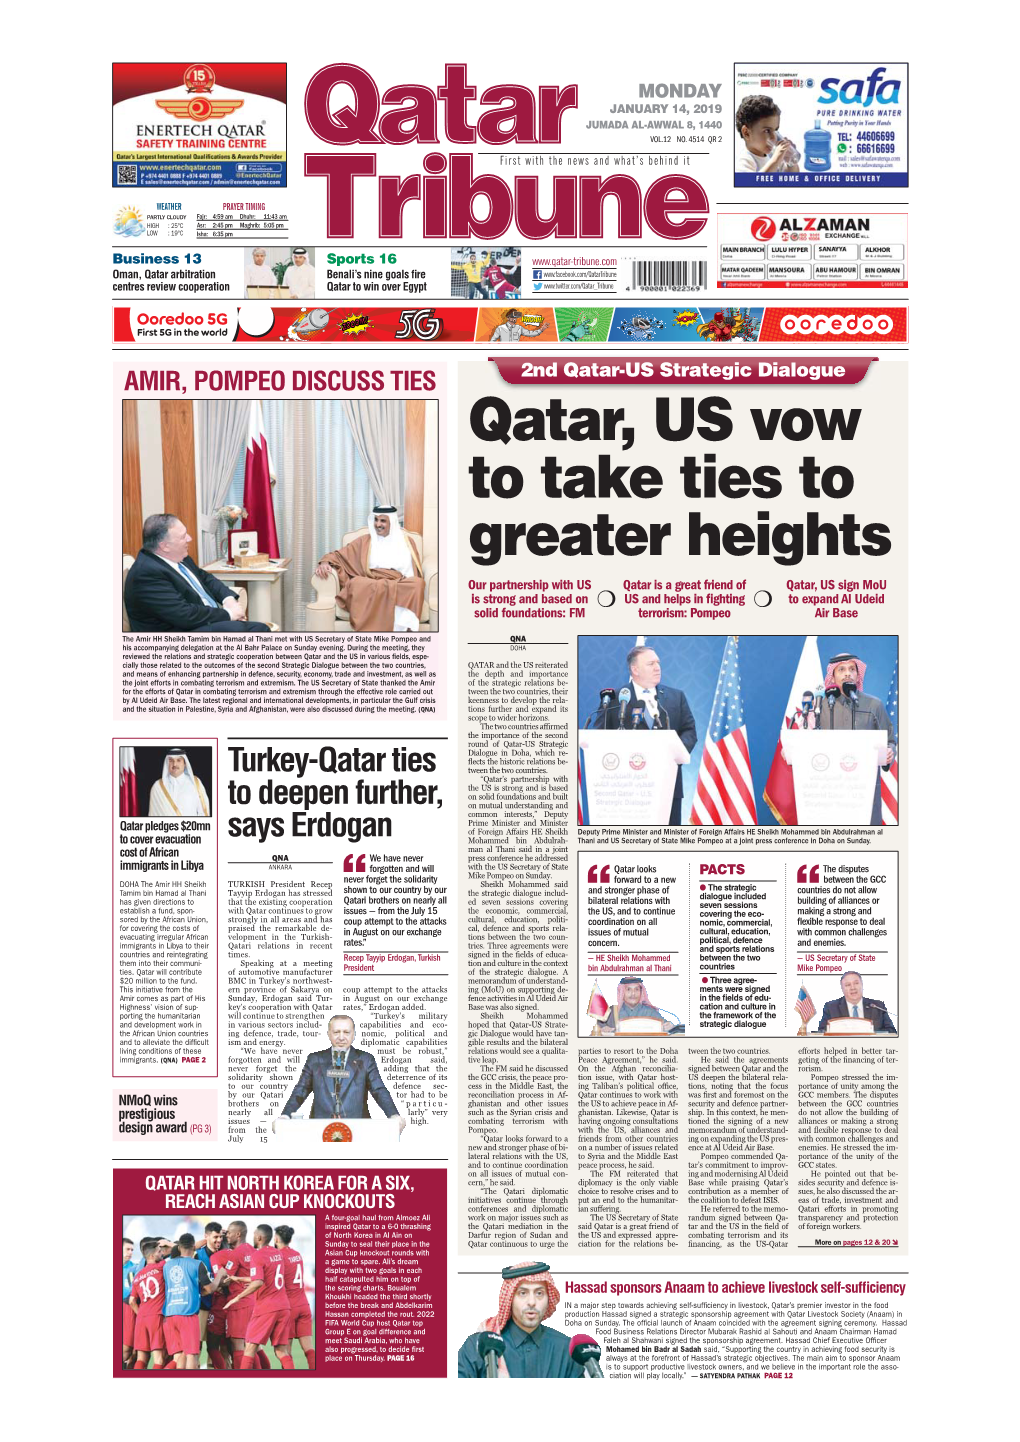 Qatar, US Vow to Take Ties to Greater Heights